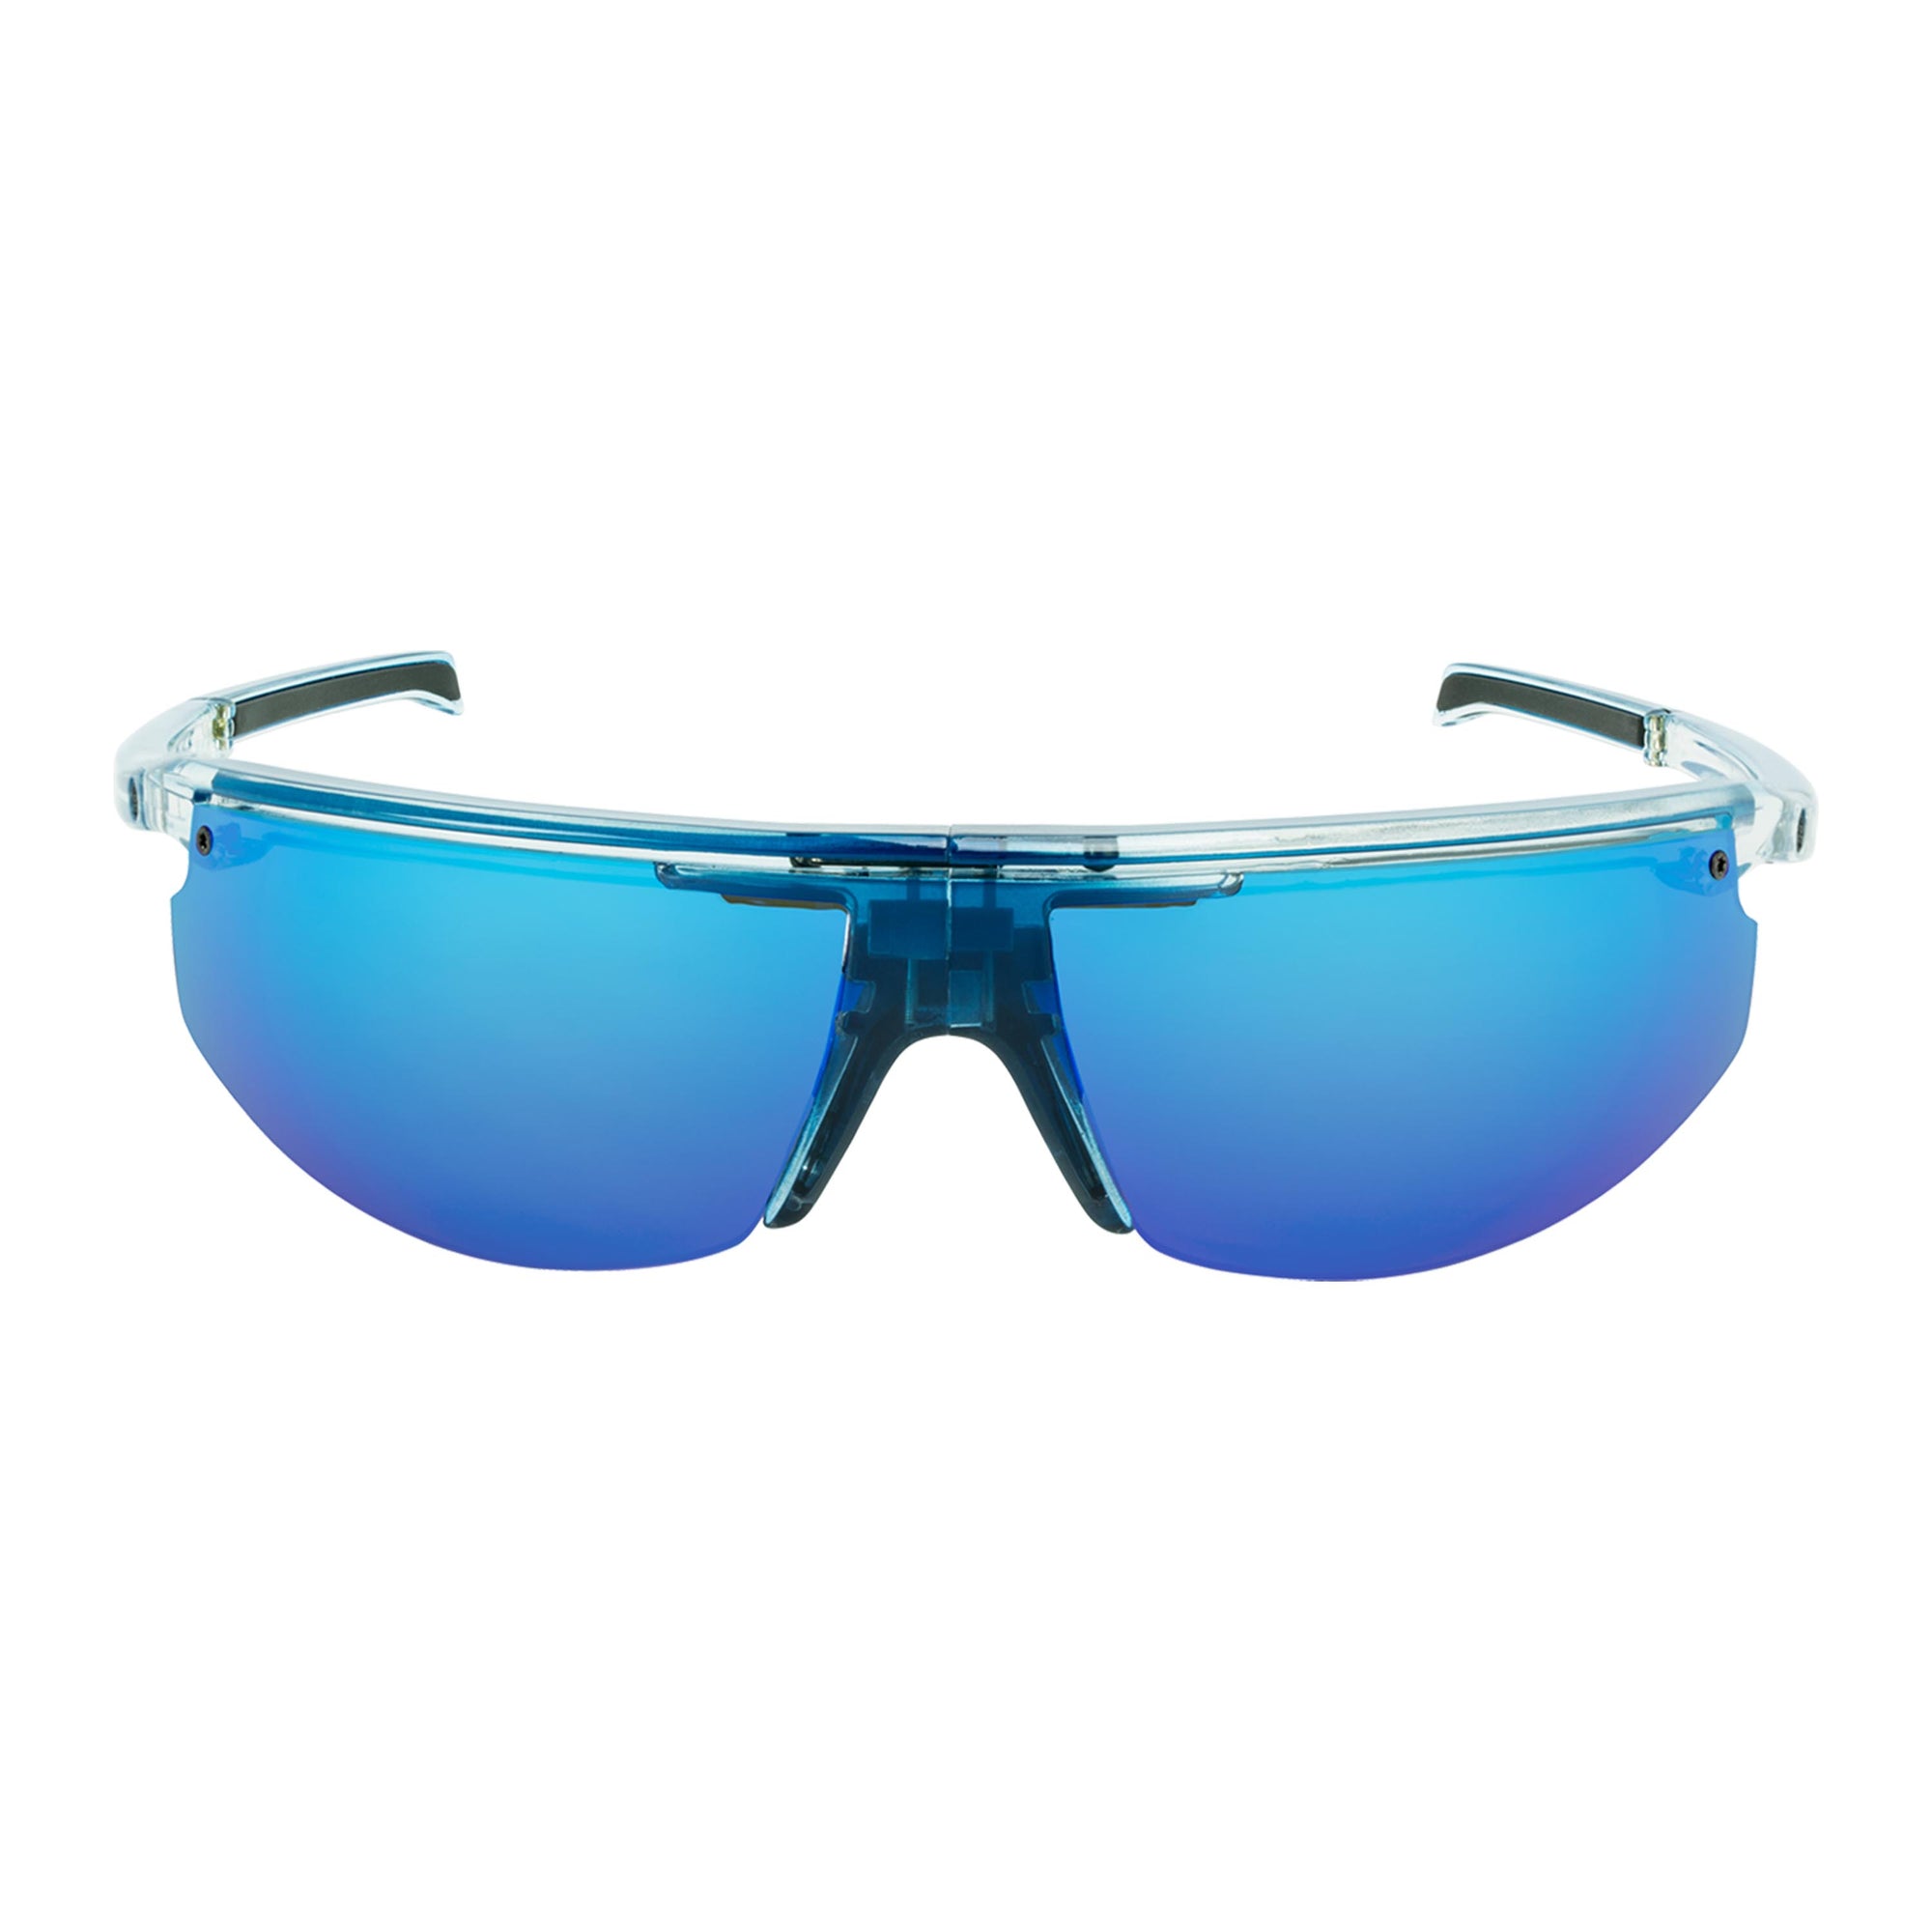 Popticals, Premium Compact Sunglasses, PopStar, 030040-BFUN, Polarized Sunglasses, Gloss Blue/Clear Crystal Frame, Gray Lenses w/Blue Mirror Finish, Front View